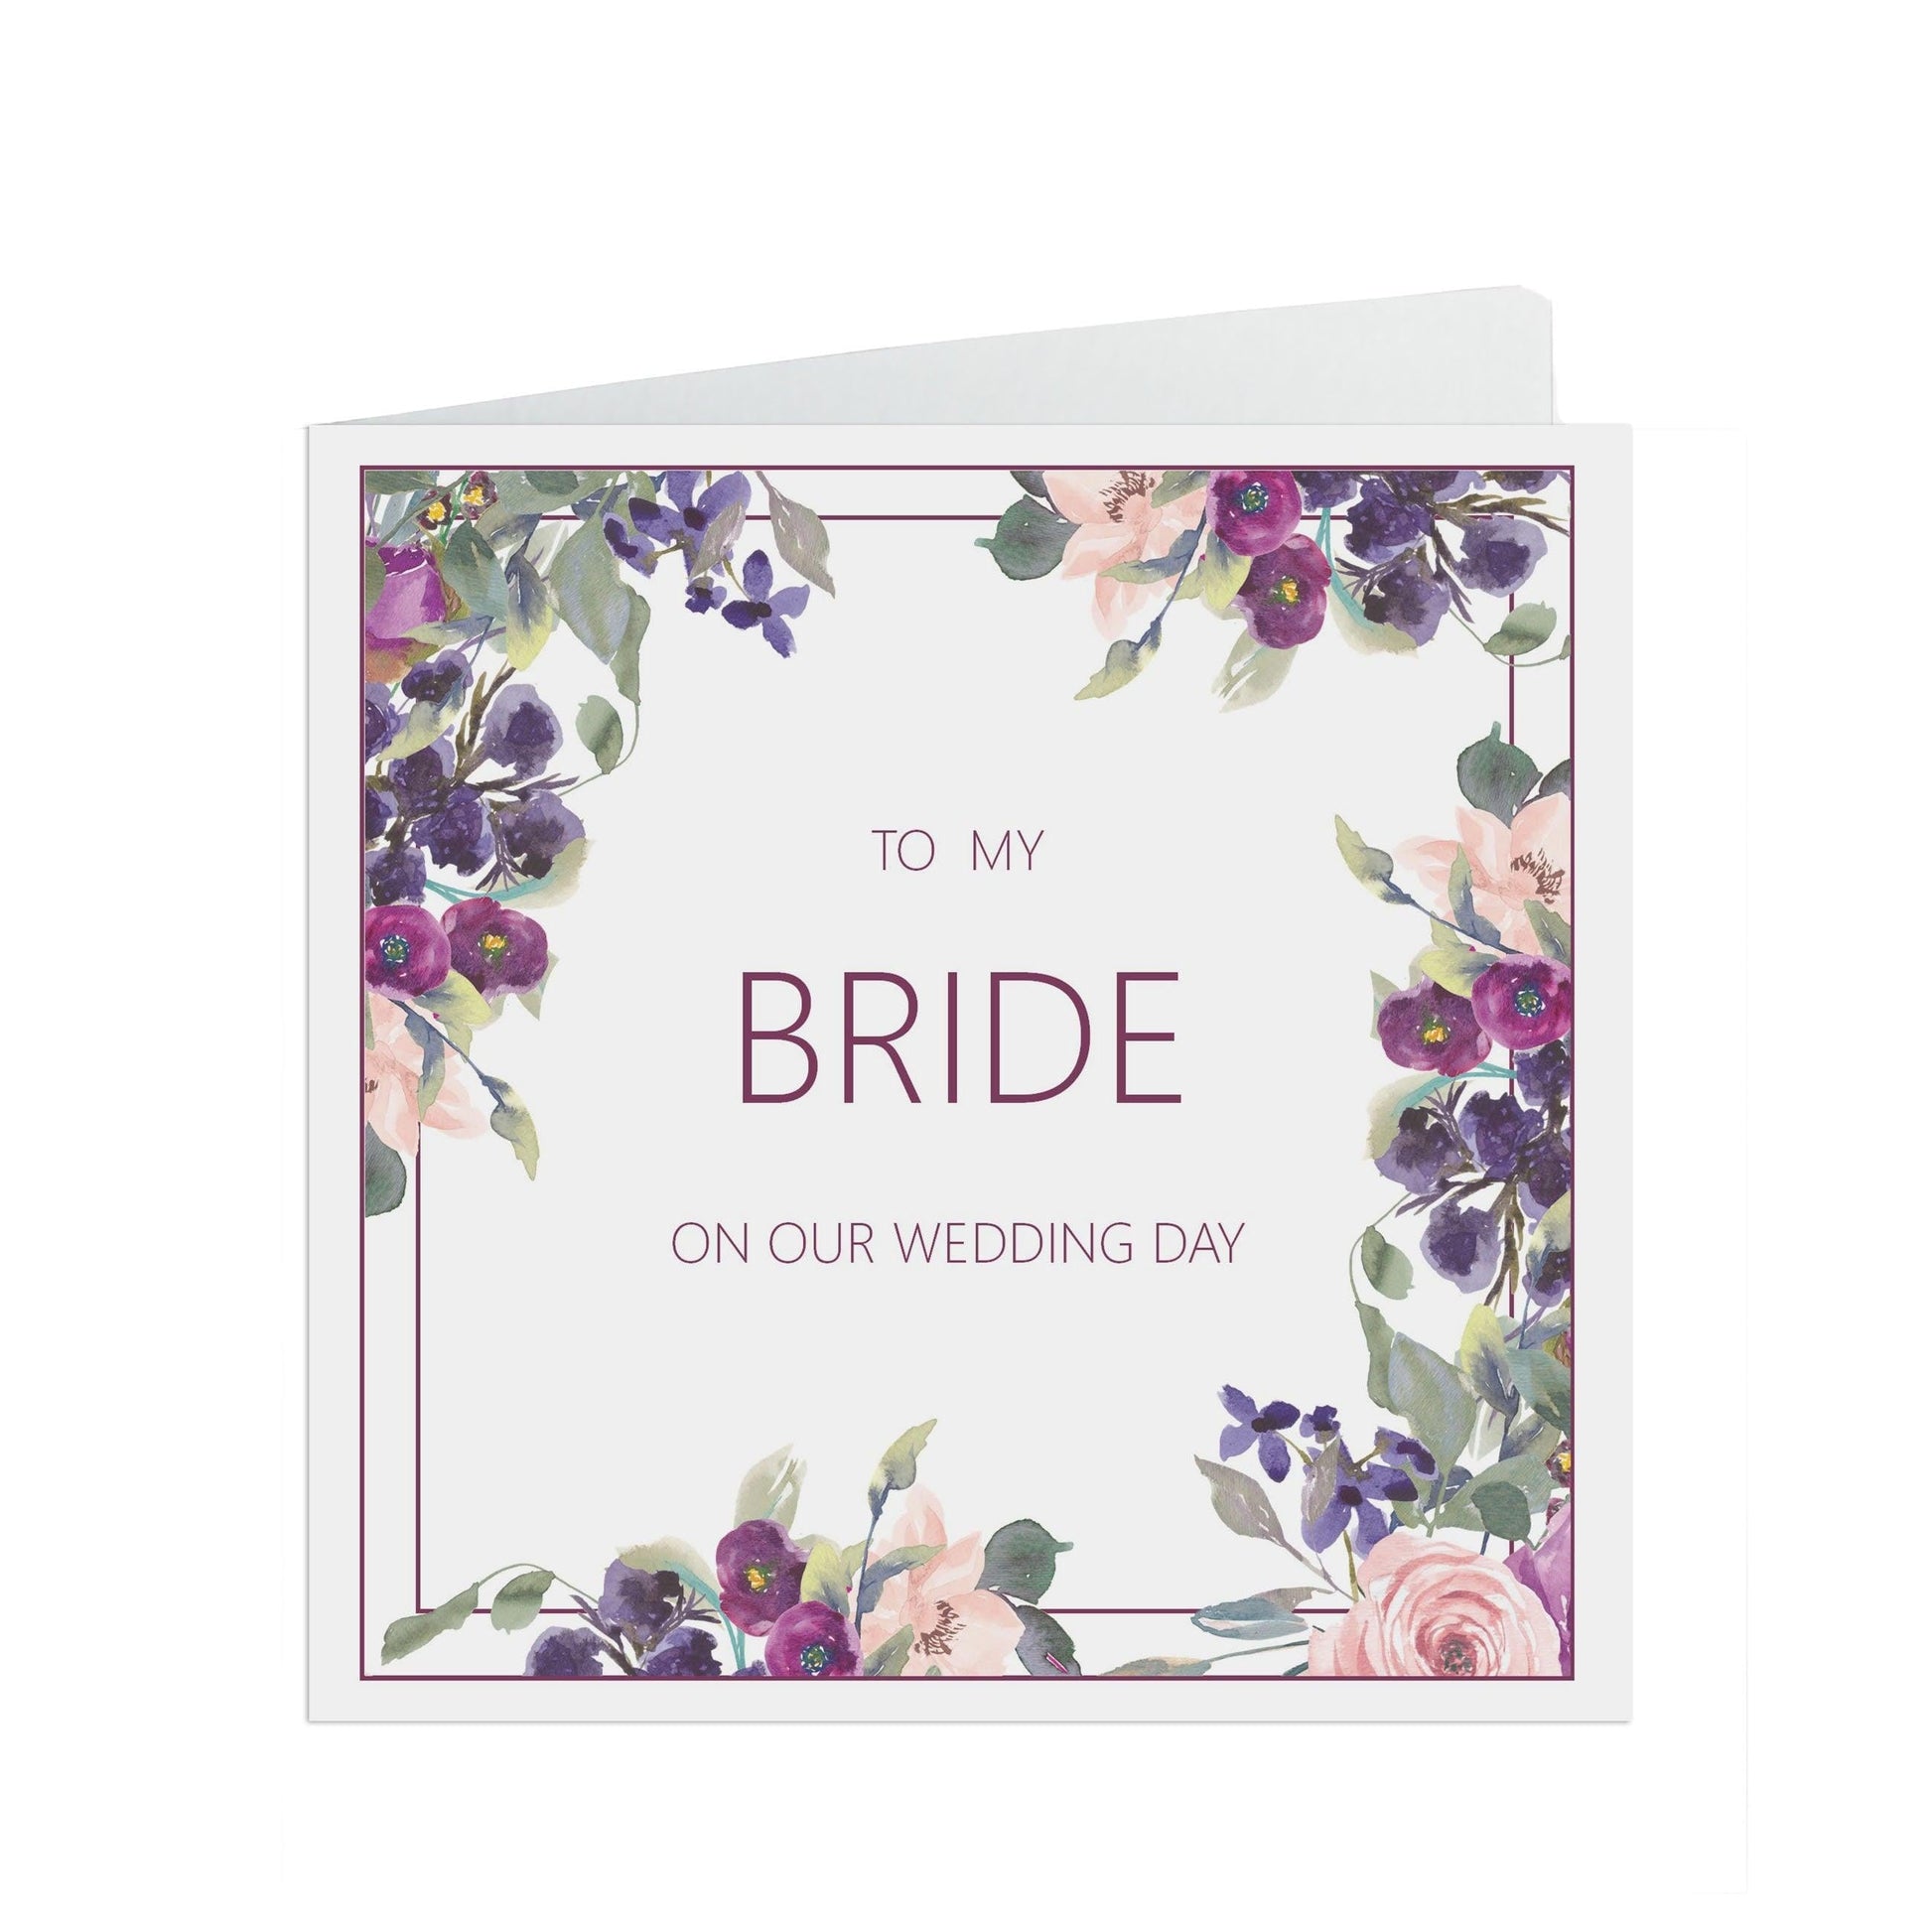  Bride Wedding Day Card, Purple Floral 6x6 Inches With A Kraft Envelope by PMPRINTED 